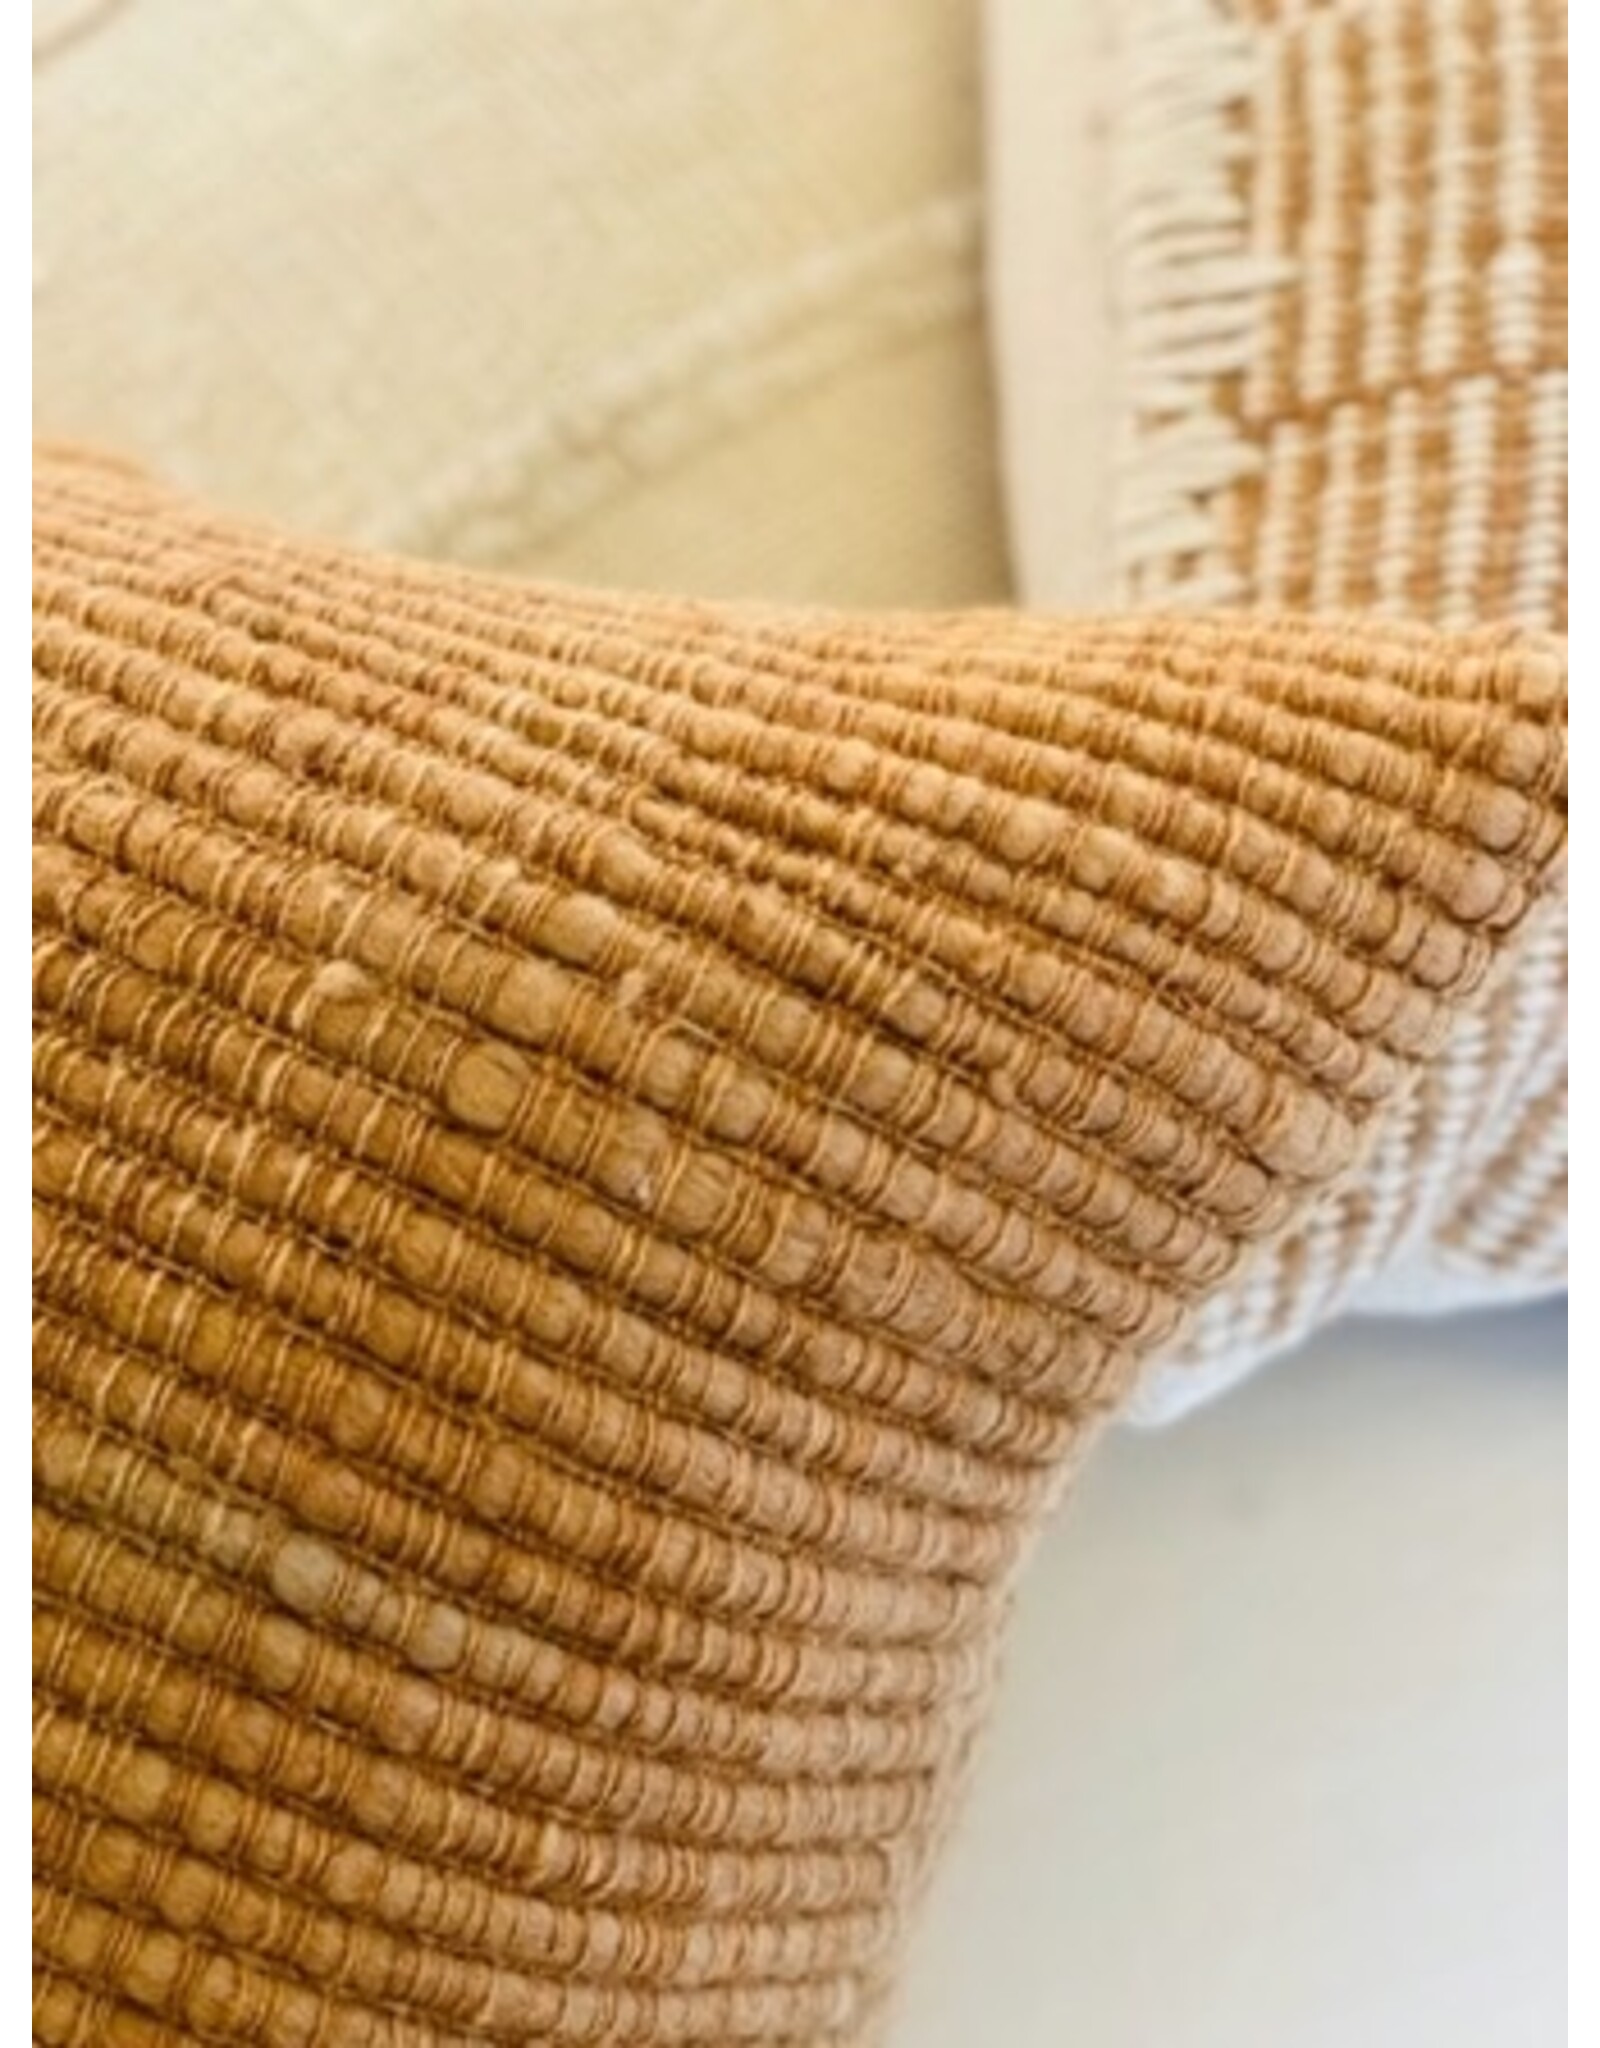 Gold Ribbed Textured Pillow, Chile 26x26